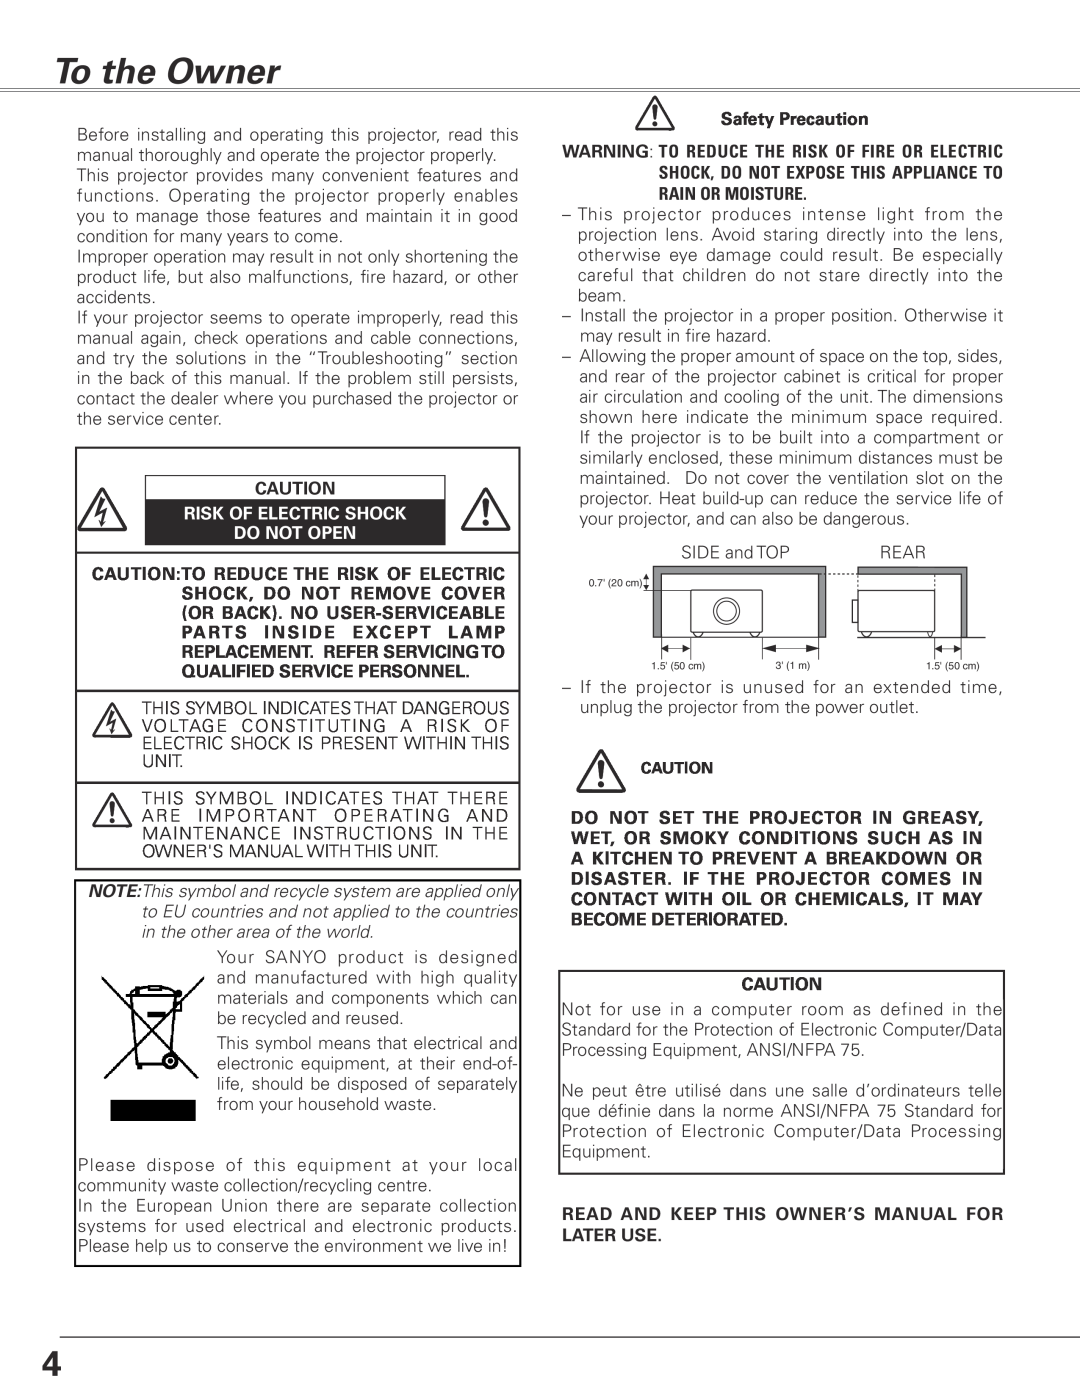 Sanyo PLC-XL45 owner manual To the Owner, Risk Of Electric Shock Do Not Open, Safety Precaution 